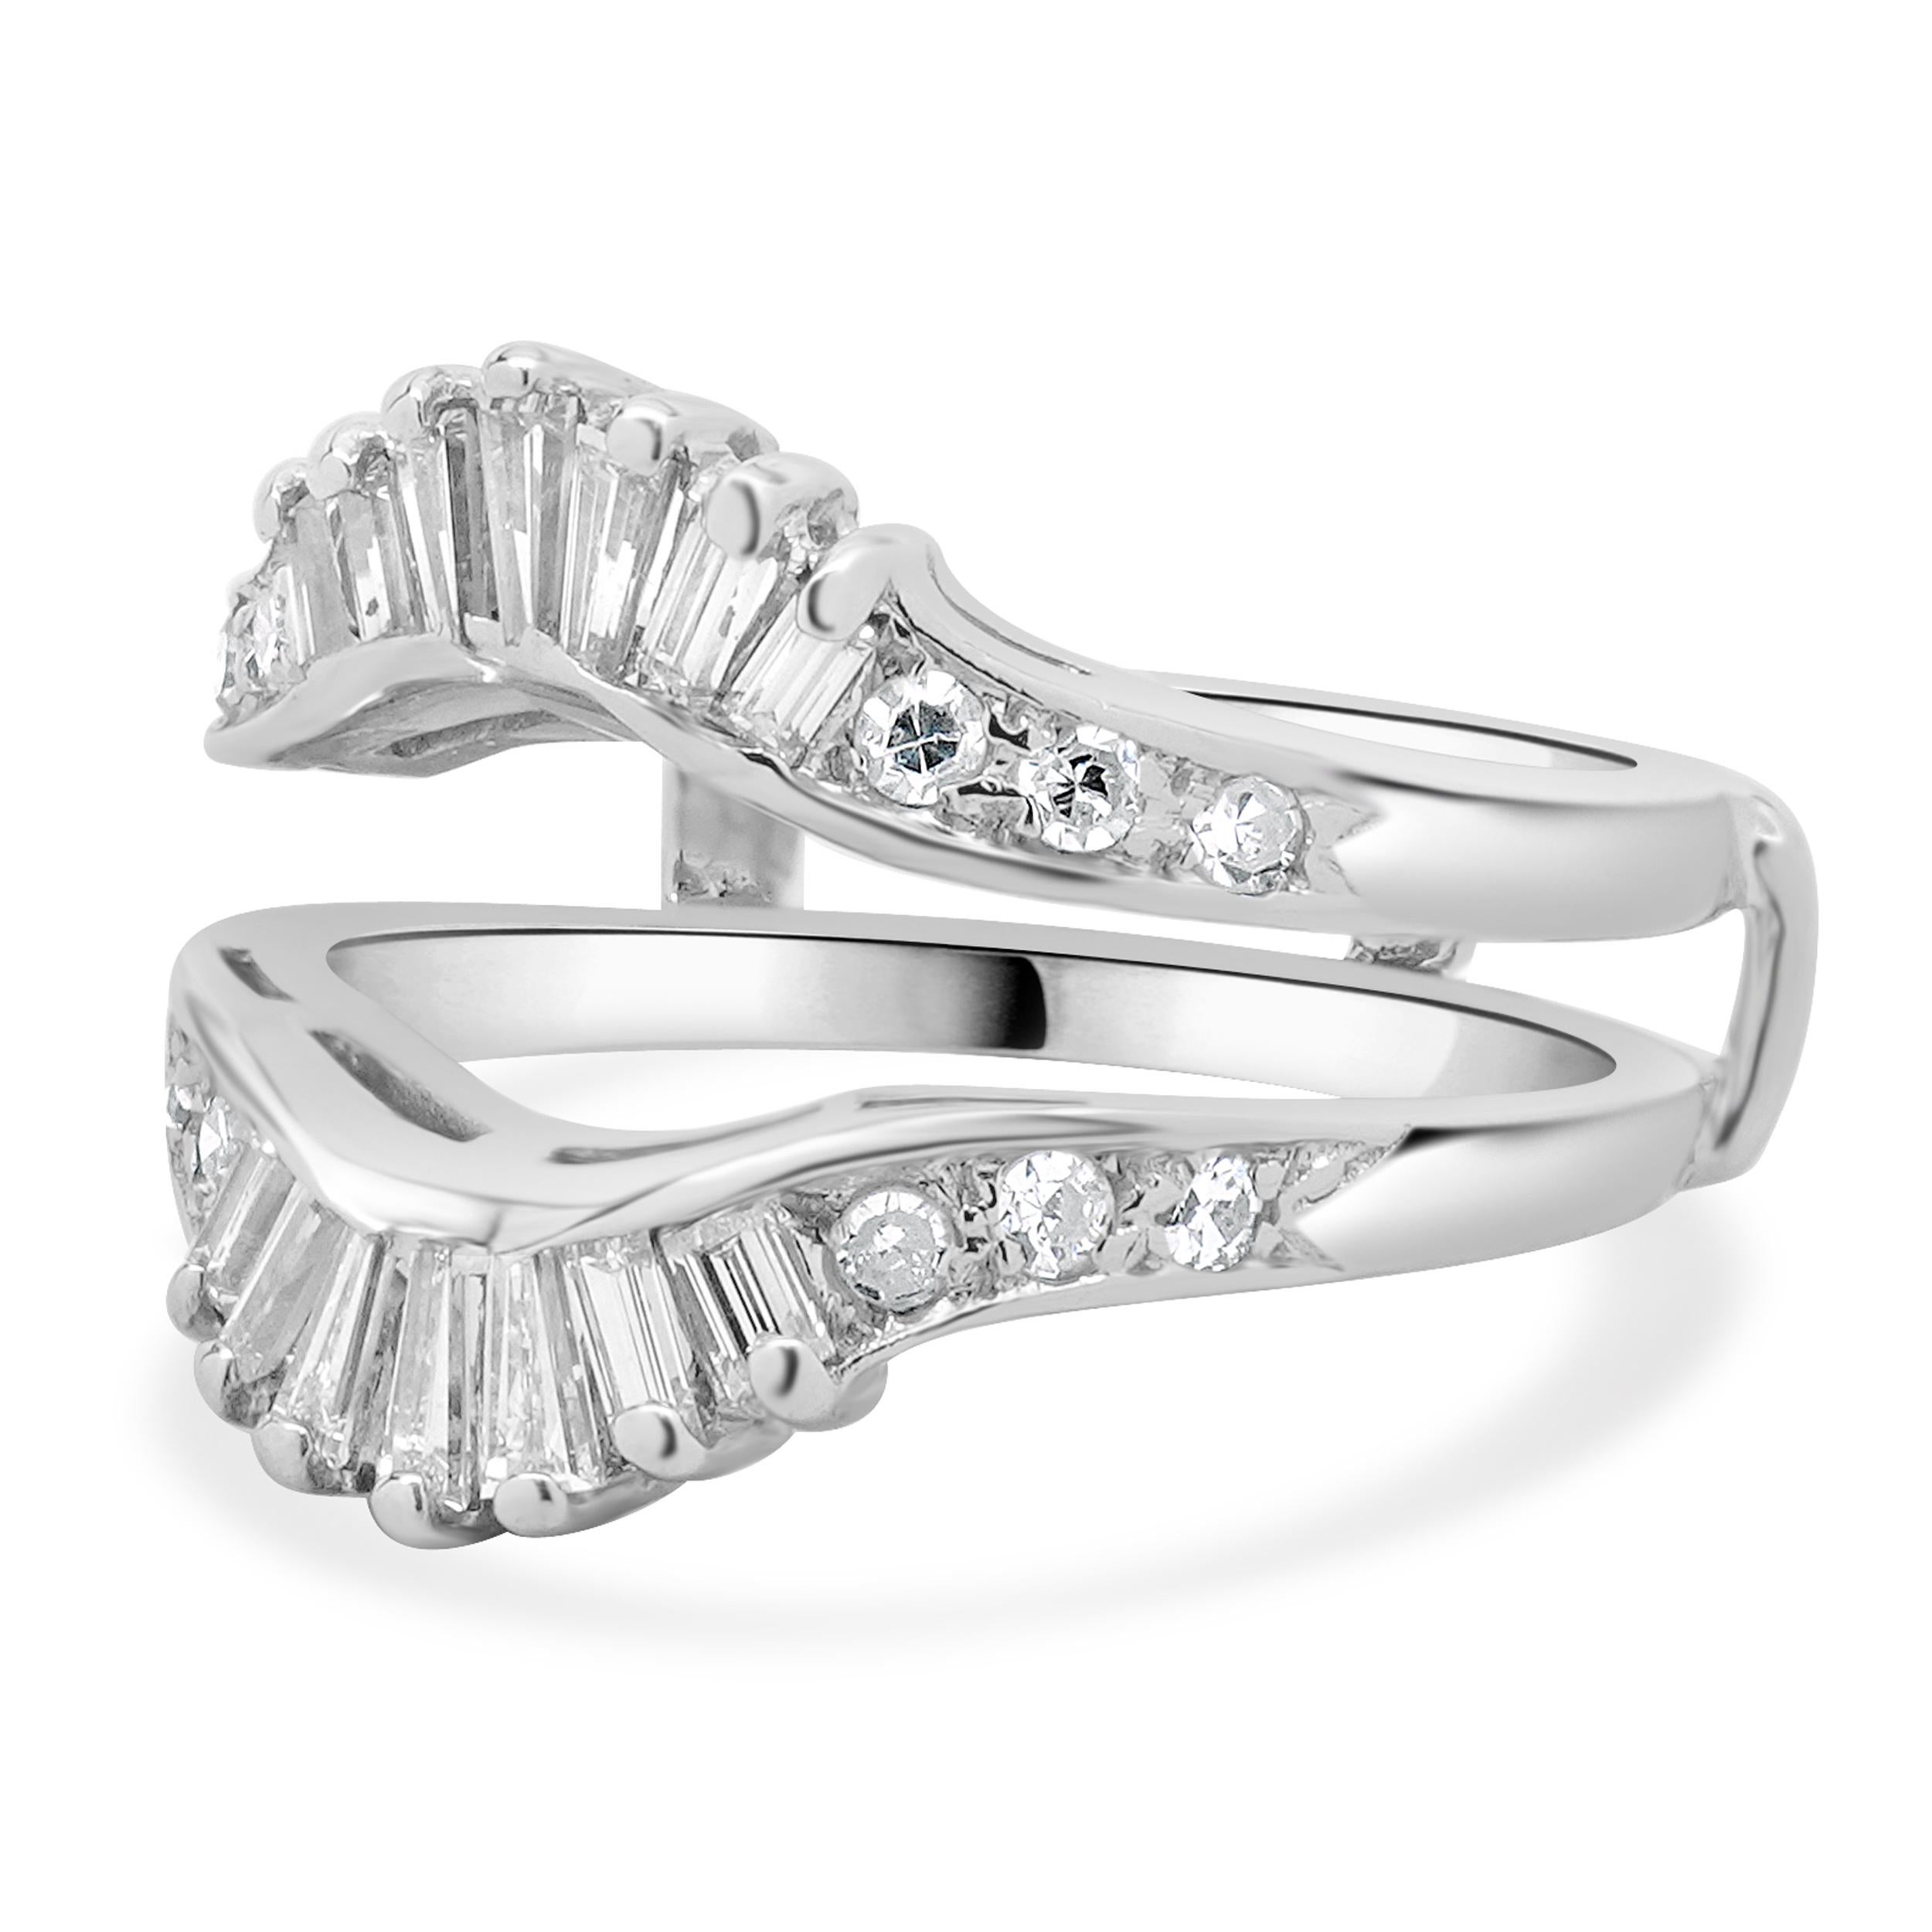 Designer: custom
Material: 14K white gold
Diamond: 26 round and baguette diamonds=0.66cttw
Color: H
Clarity: SI2
Ring size: 6 (please allow two additional shipping days for sizing requests)
Weight: 4.66 grams
